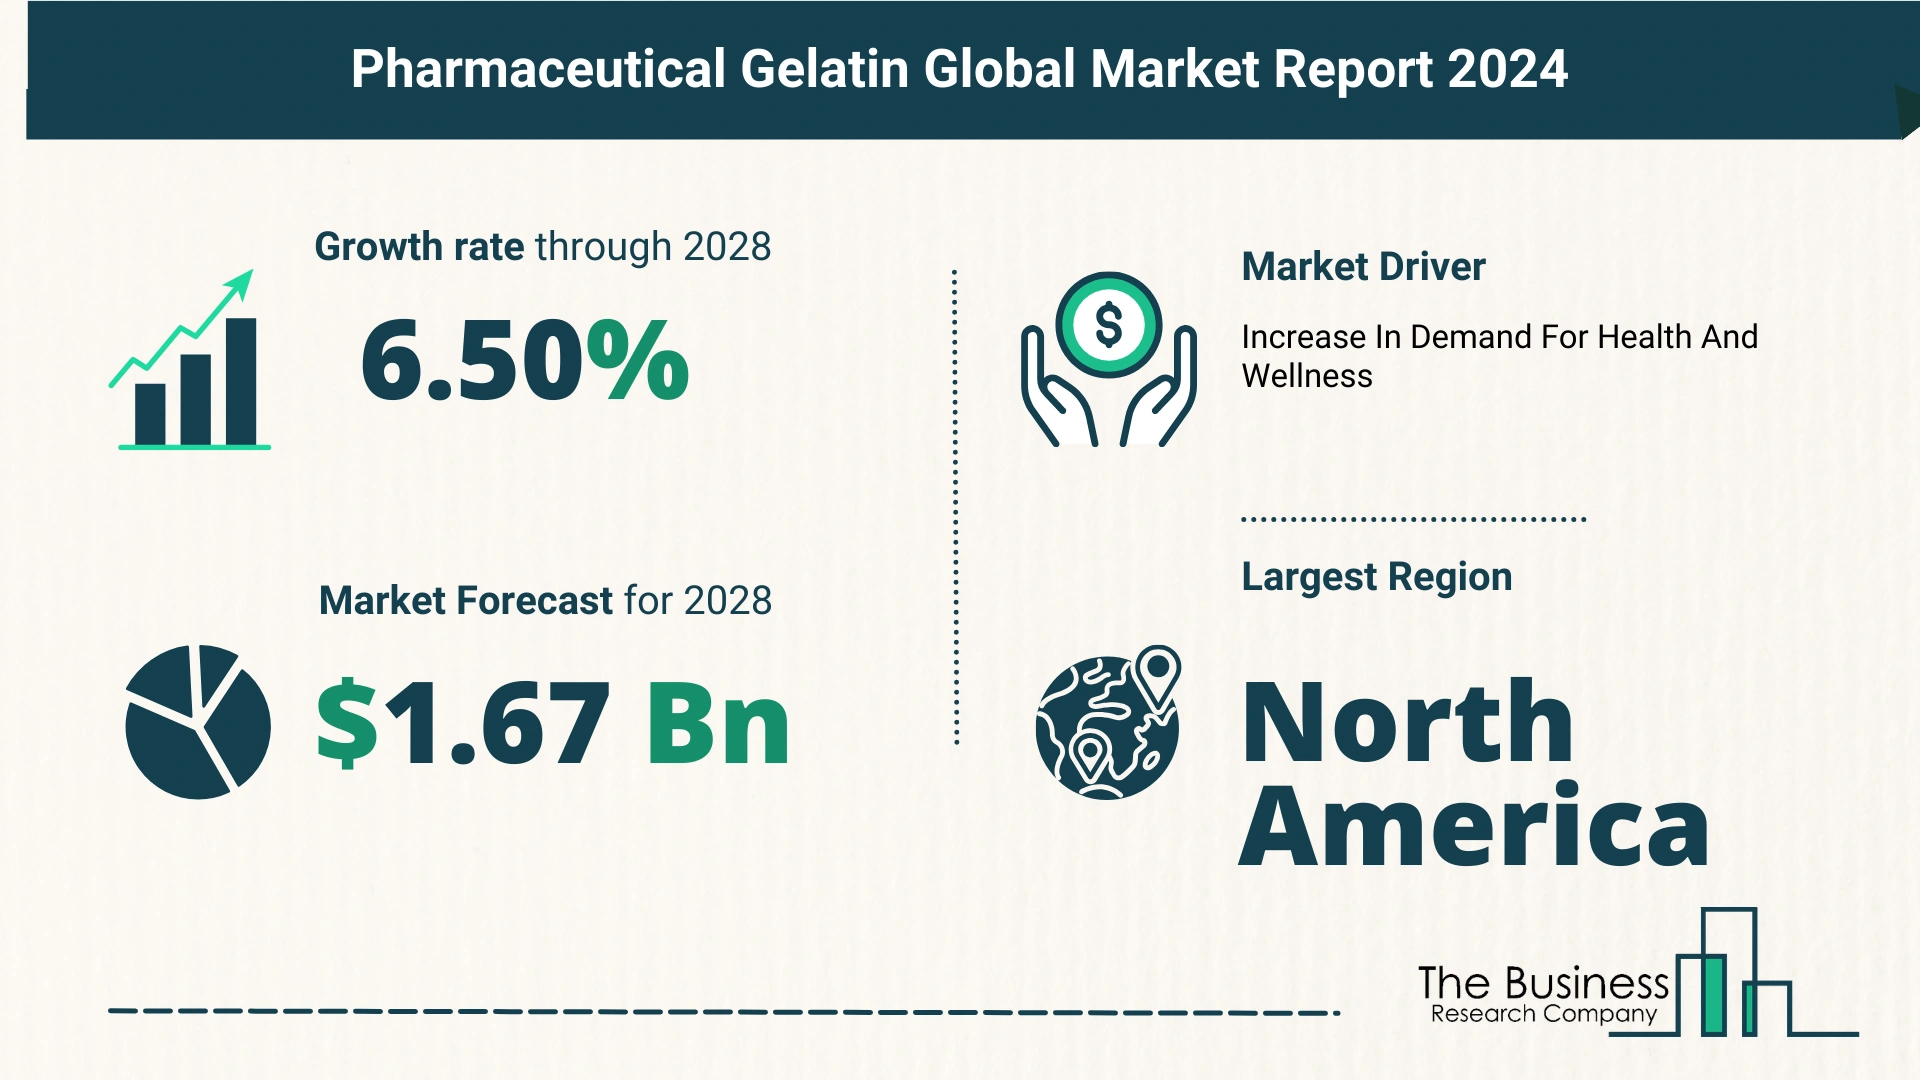 Key Trends And Drivers In The Pharmaceutical Gelatin Market 2024